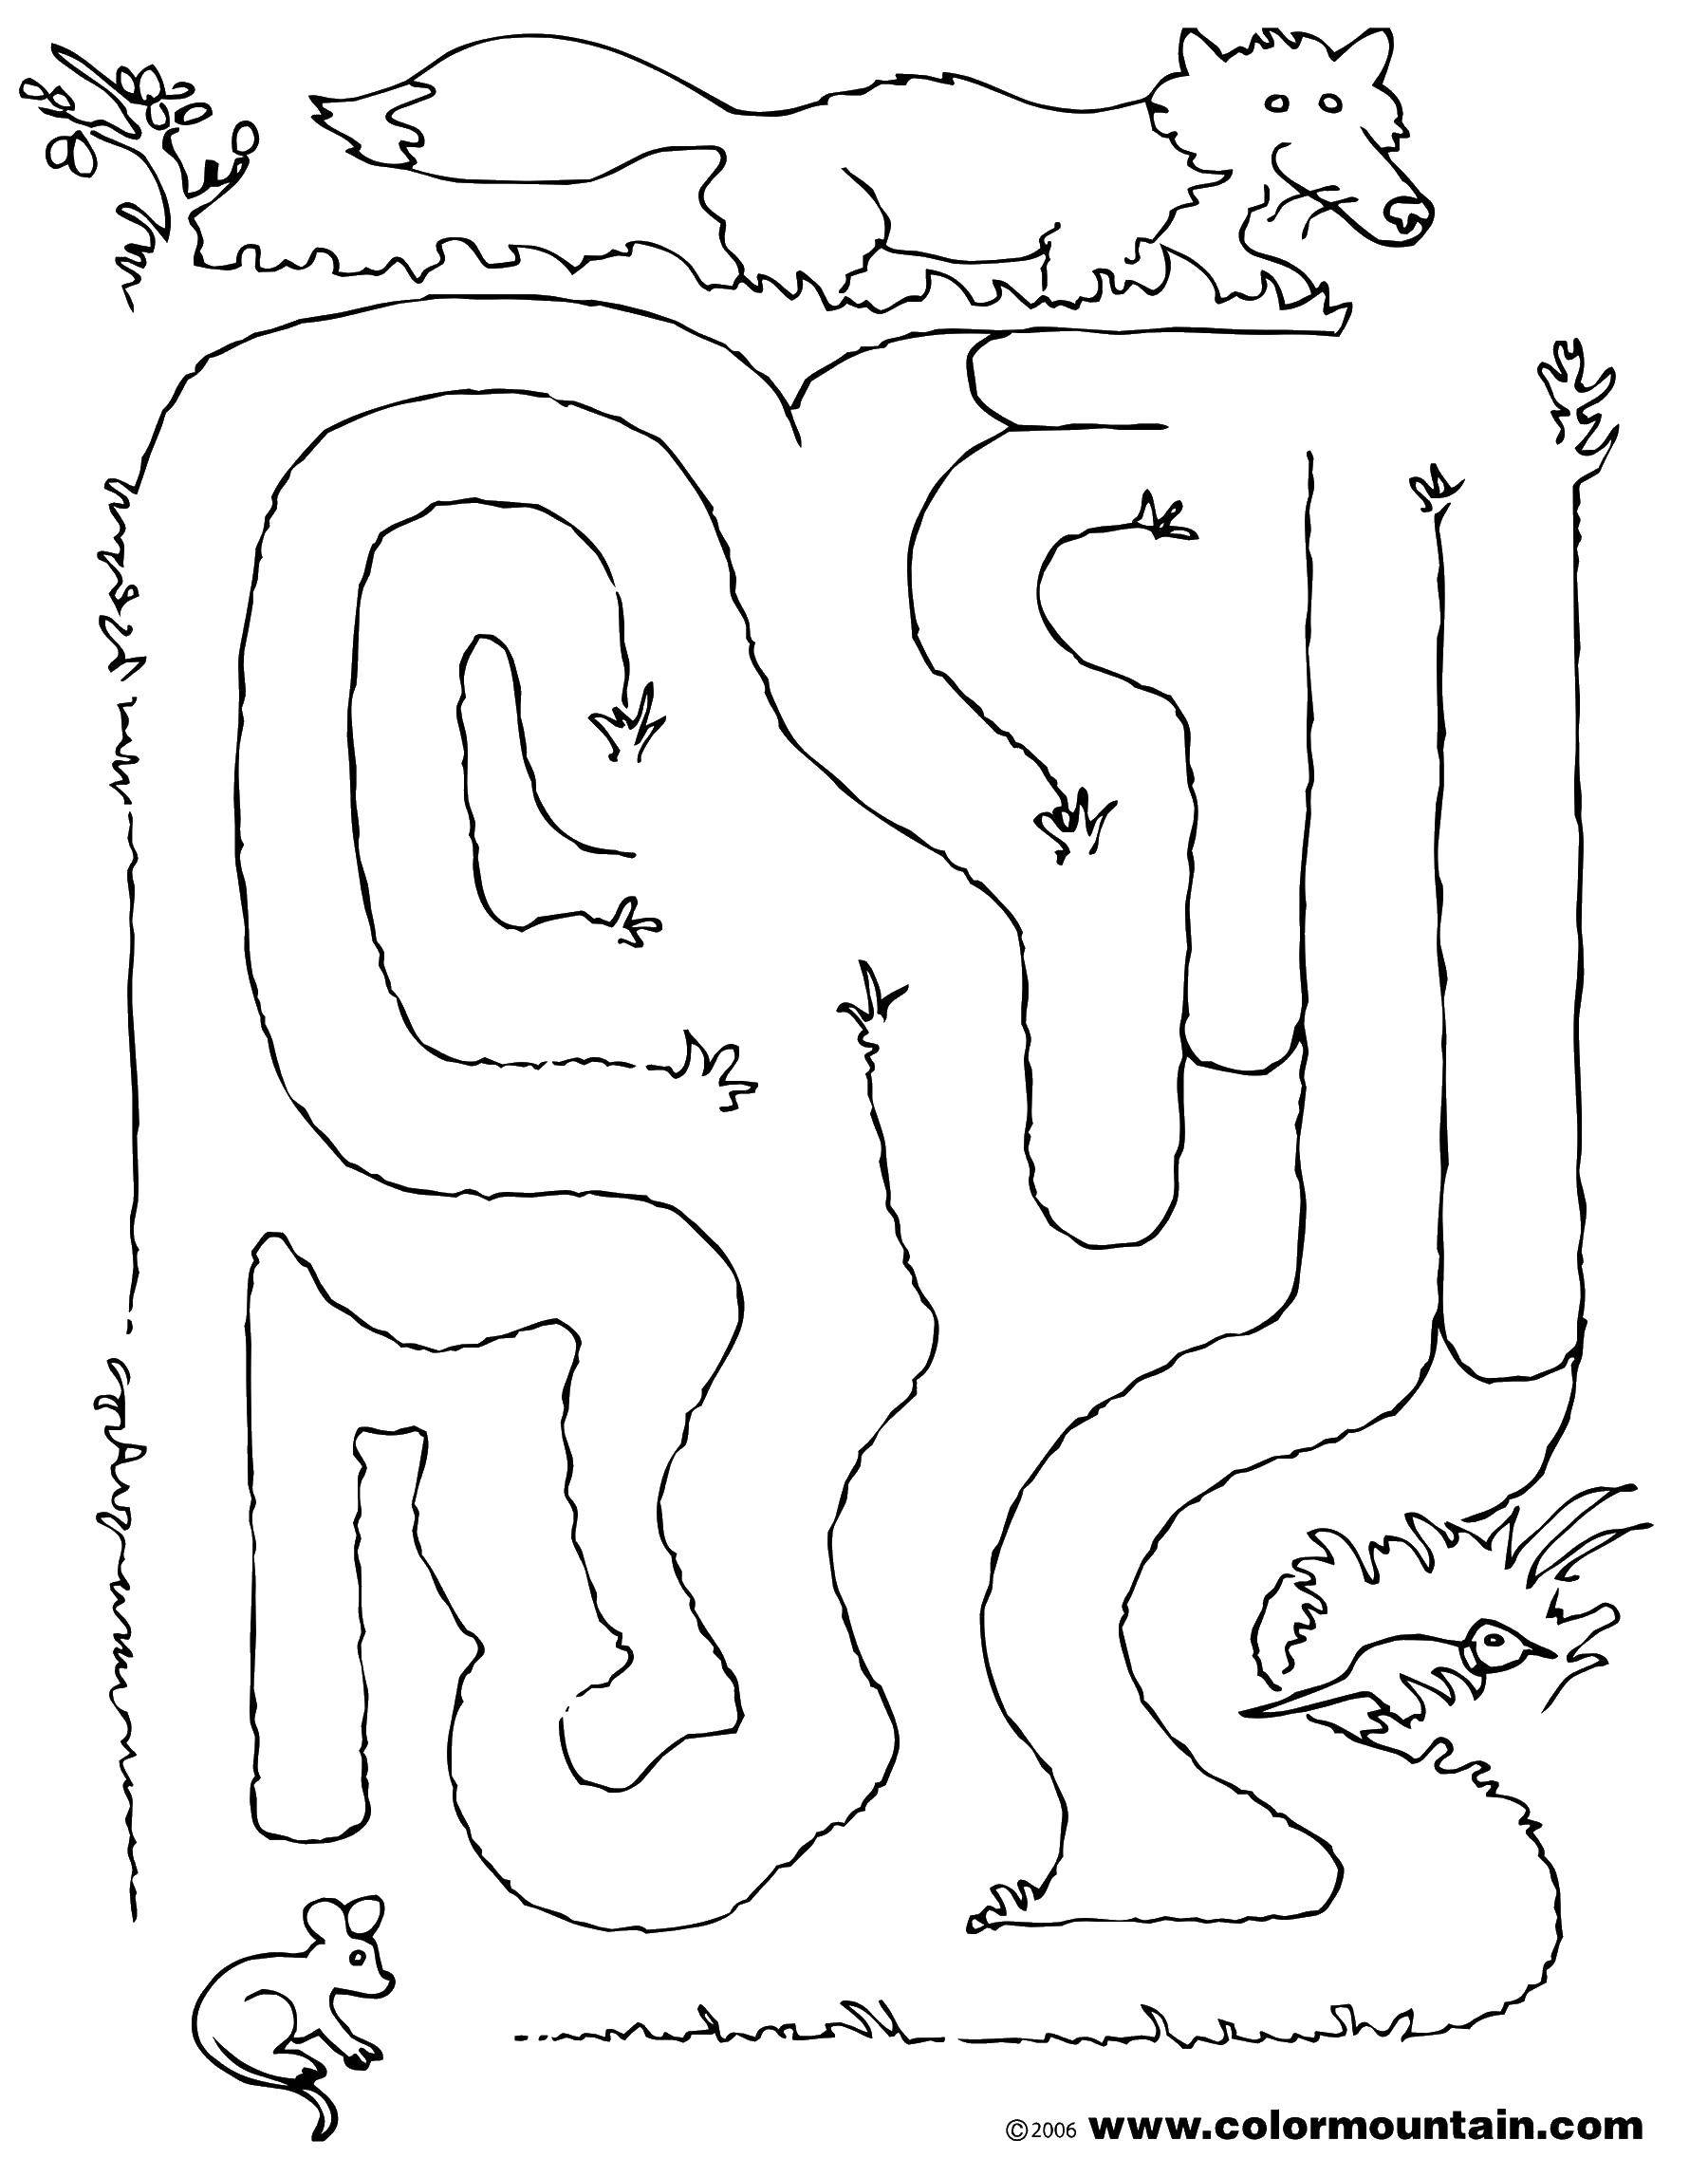 Coloring Help a Fox. Category Mazes. Tags:  Maze, logic.